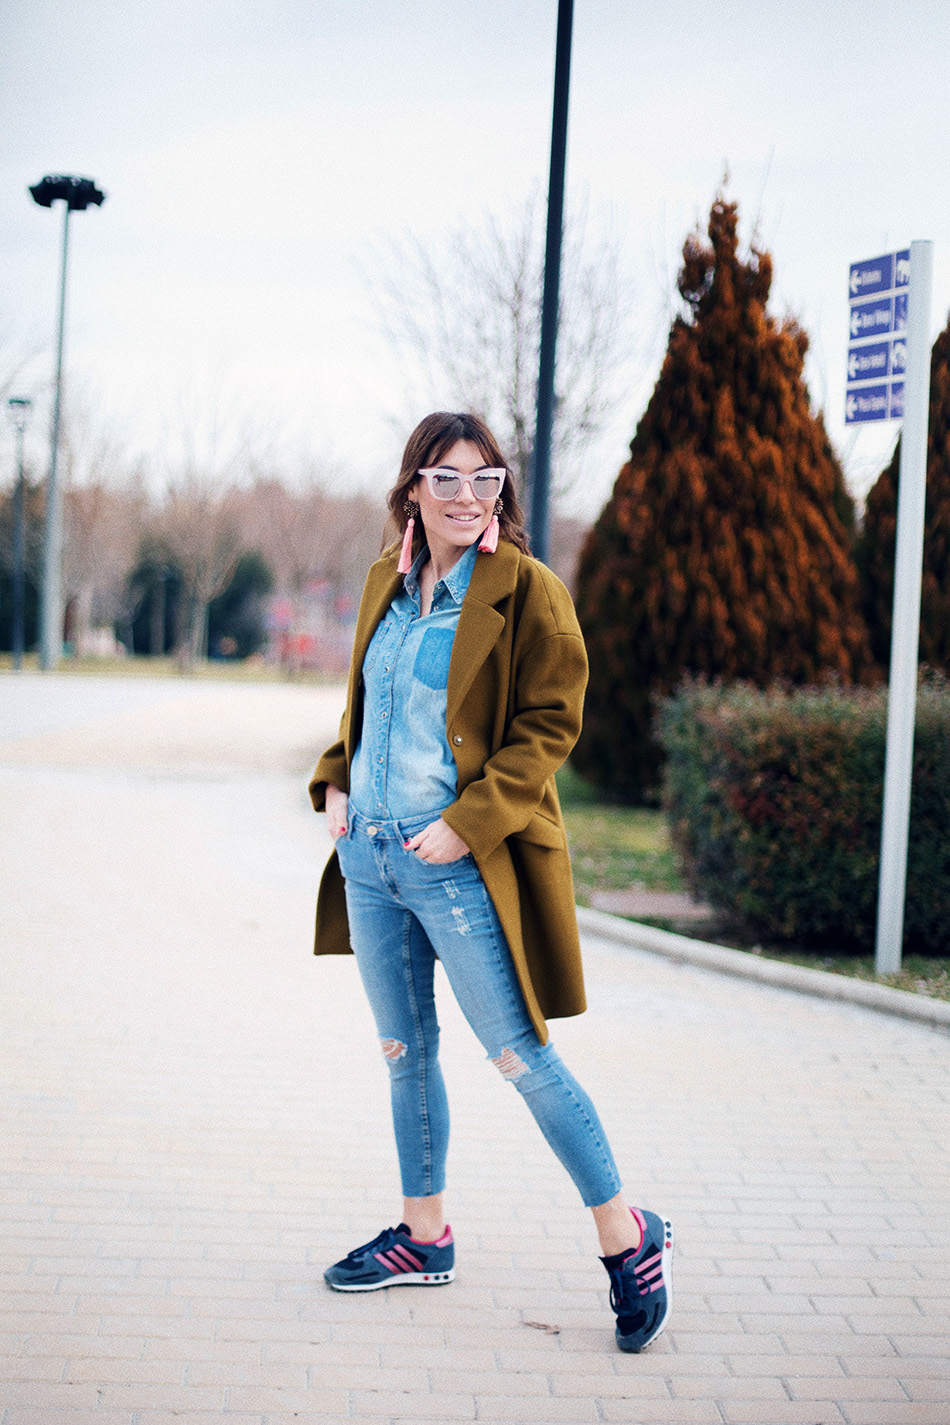 Bárbara Crespo street style / Oversize Coat / denim total look / Sunglasses from Celine / Sneakers from Adidas / Pink long earrings Trendy outfit